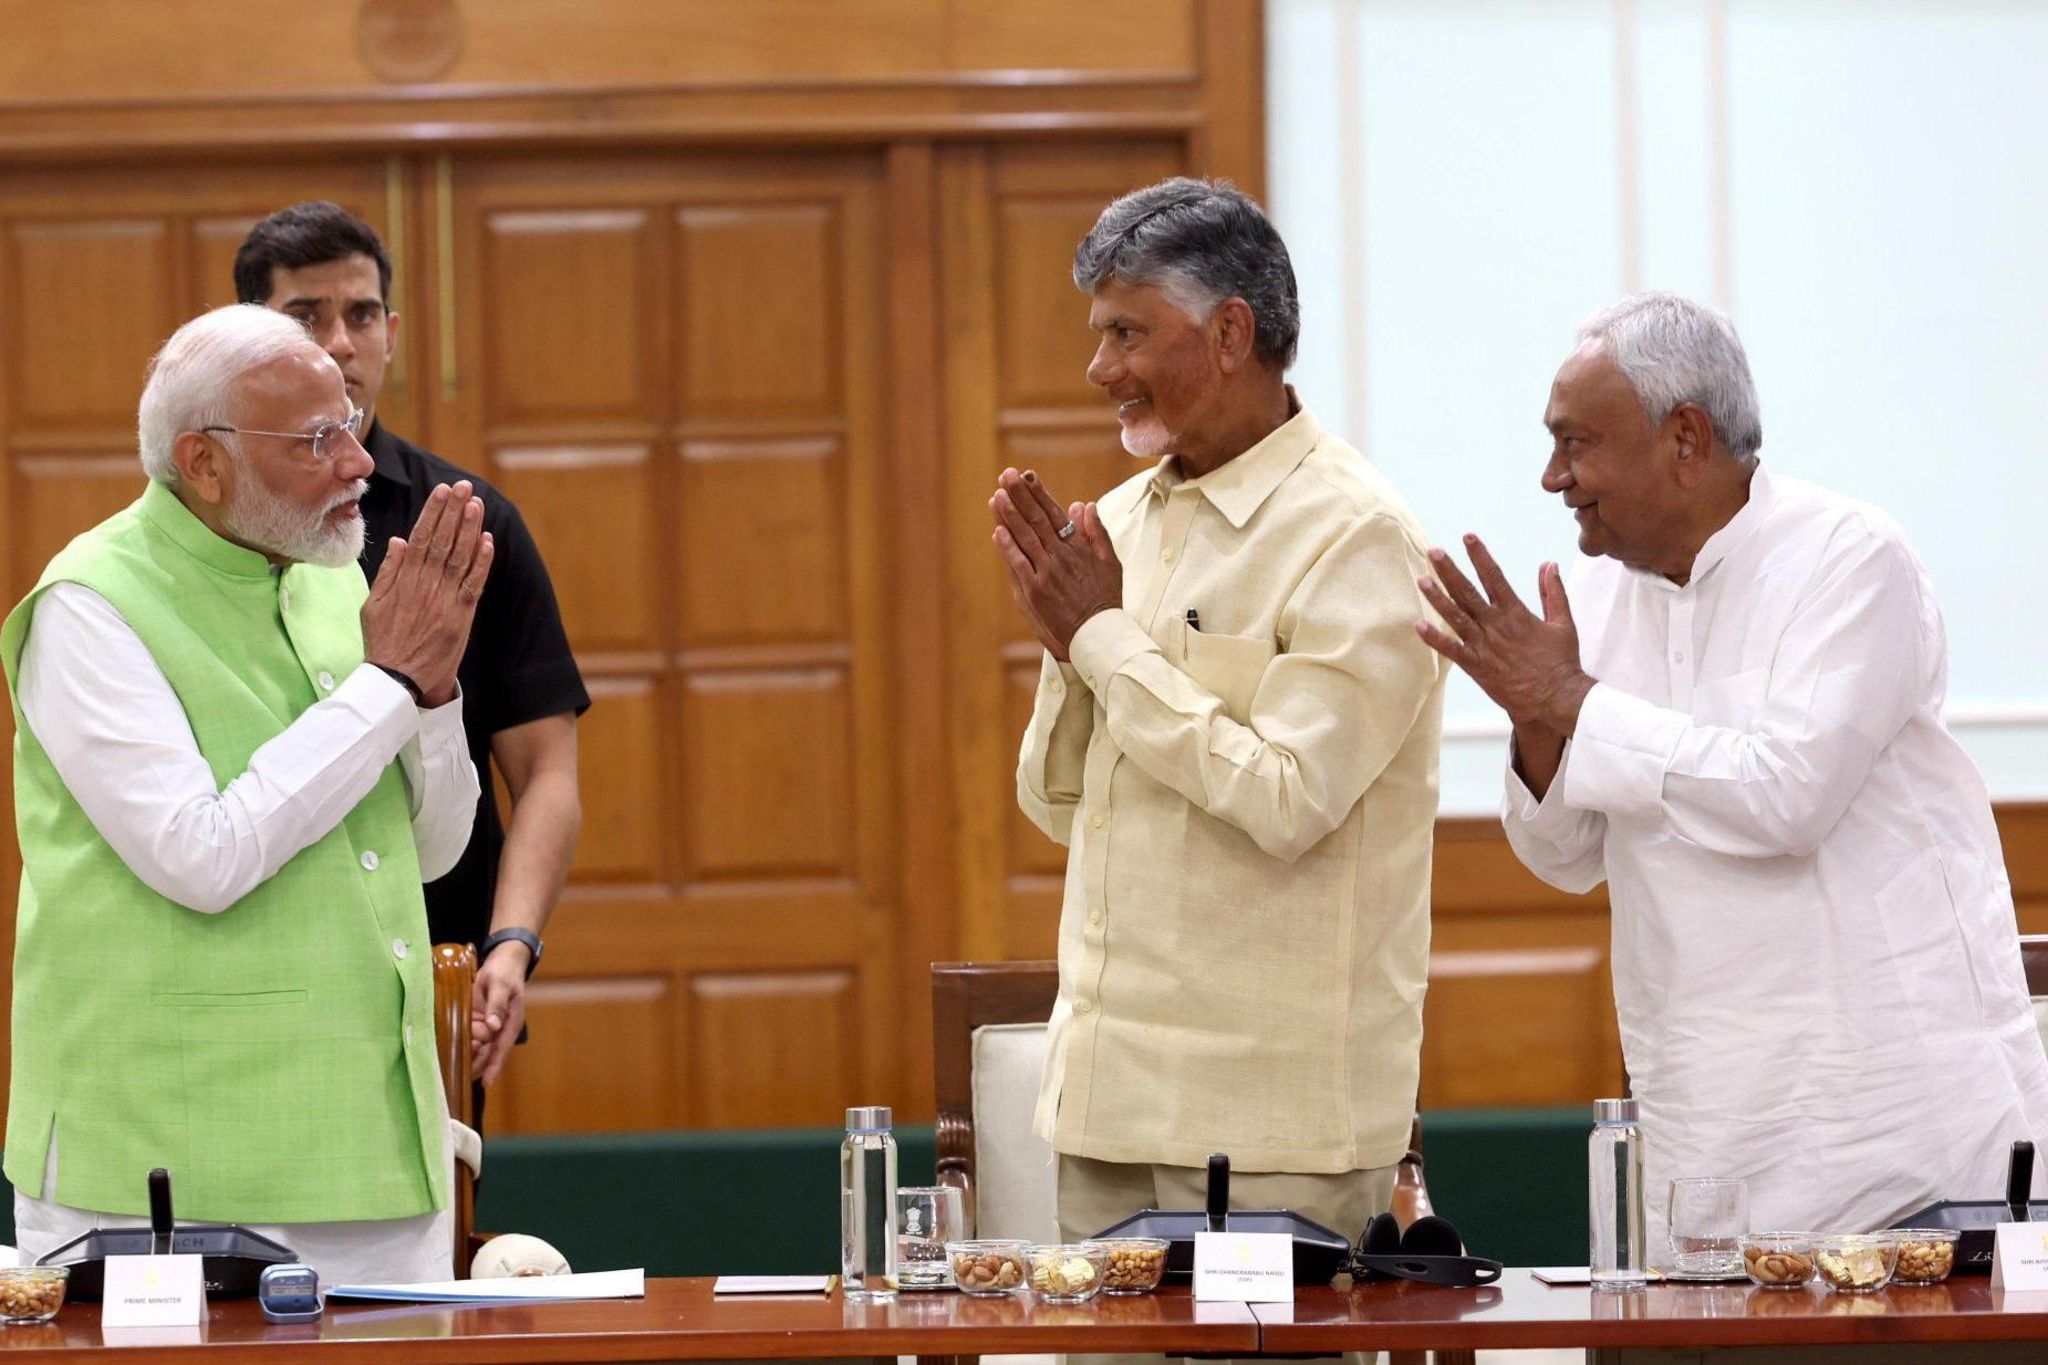 Nitish Kumar (right) and N Chandrababu Naidu (second from right) have served in BJP-led governments in the past